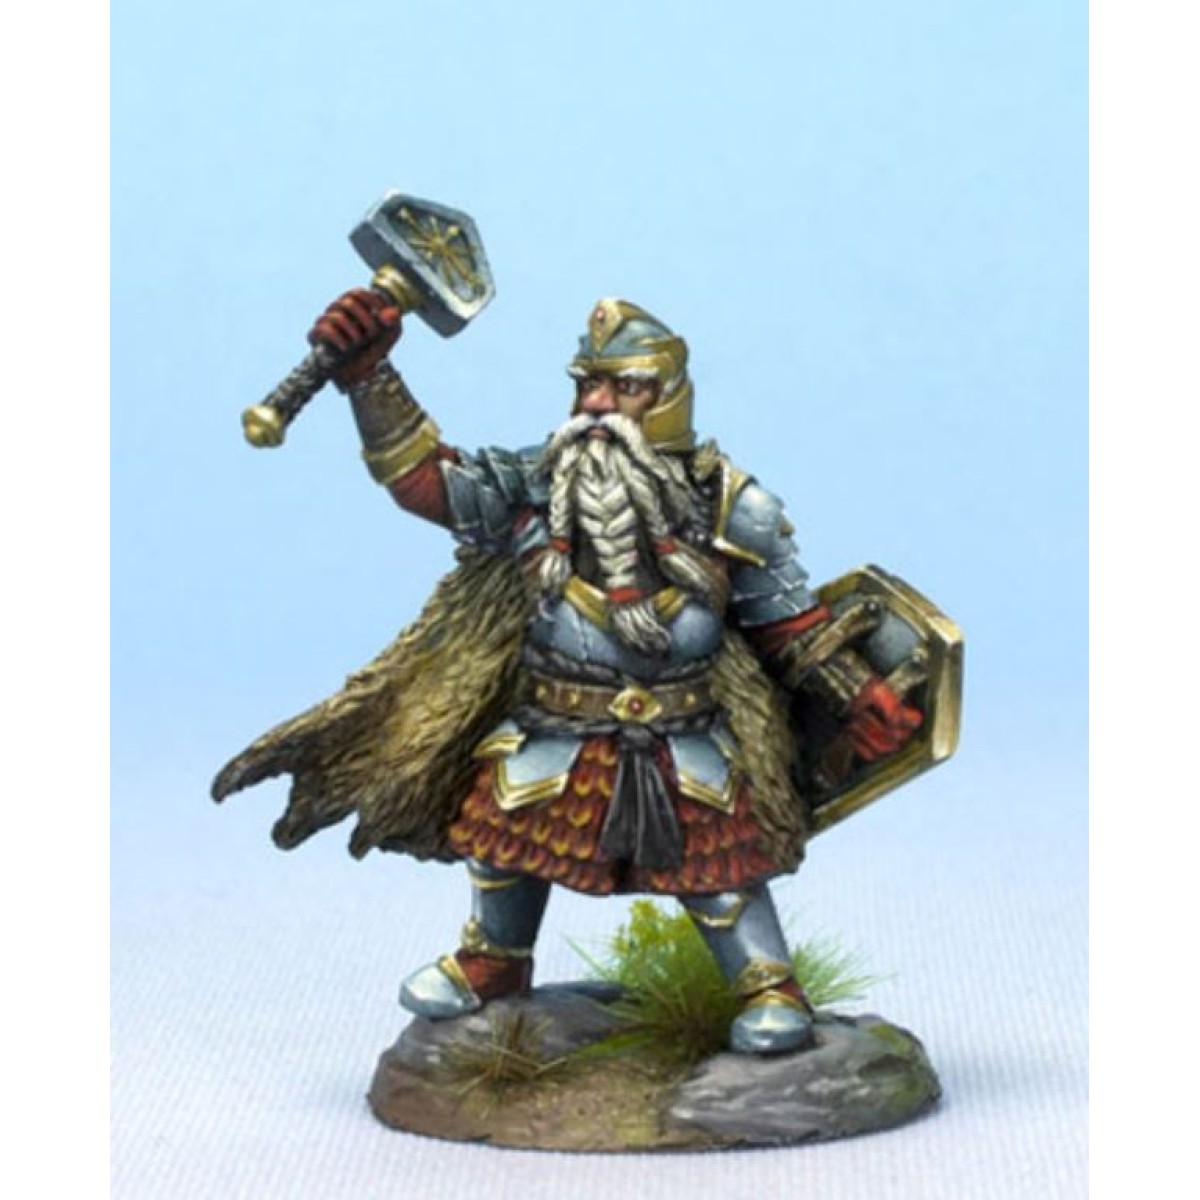 Dark Sword Miniatures Visions In Fantasy Male Dwarven Cleric With